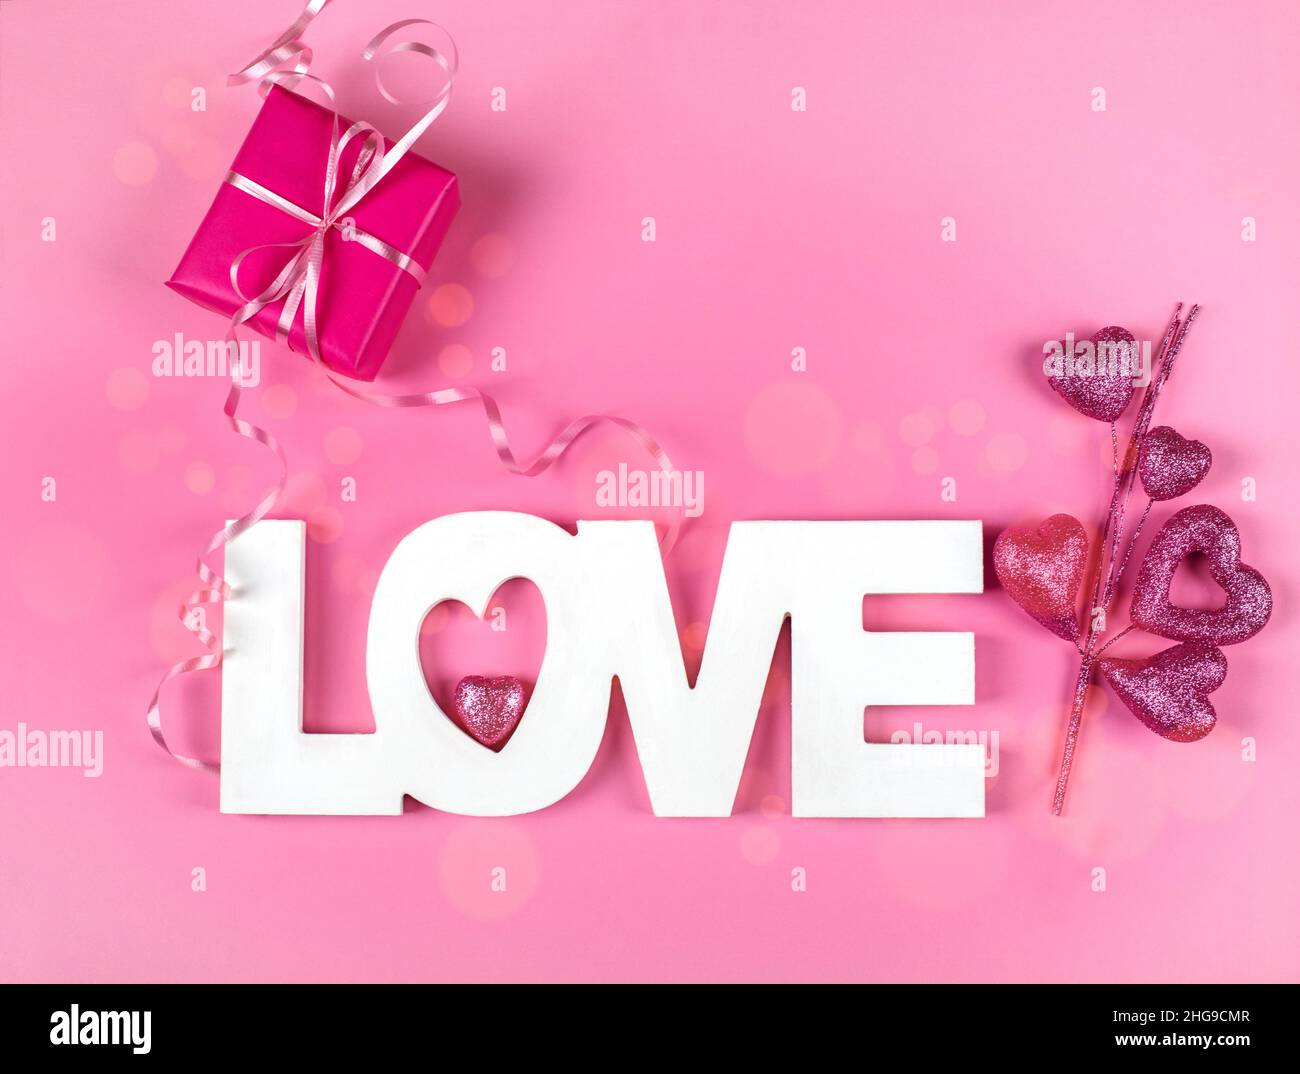 Wrapped gift box with the word Love and pink heart ornament on a pink background Stock Photo